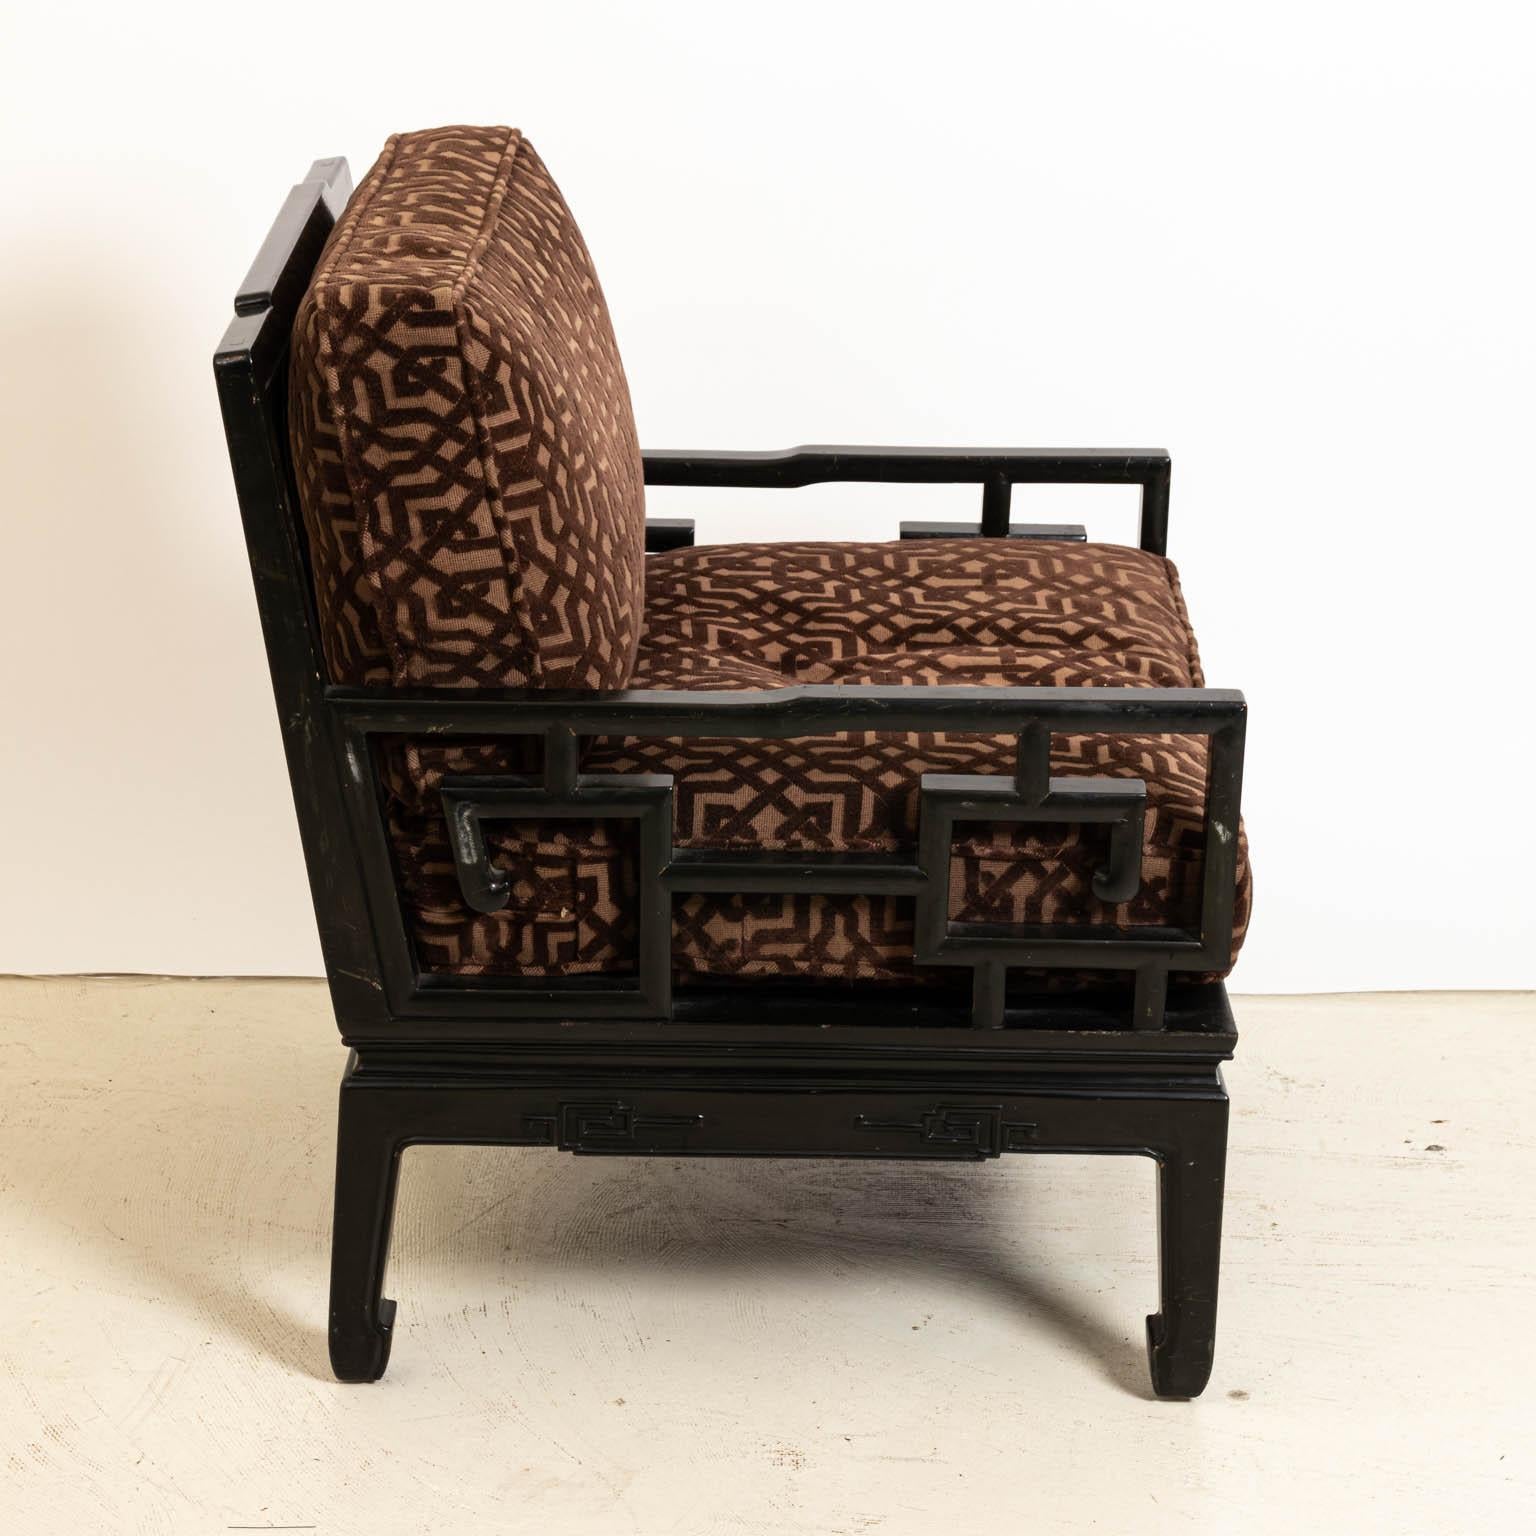 Pair of Oriental style armchairs by Baker with loose upholstered cushions, circa 1960. Made in the United States. Please note of wear consistent with age including minor paint loss.